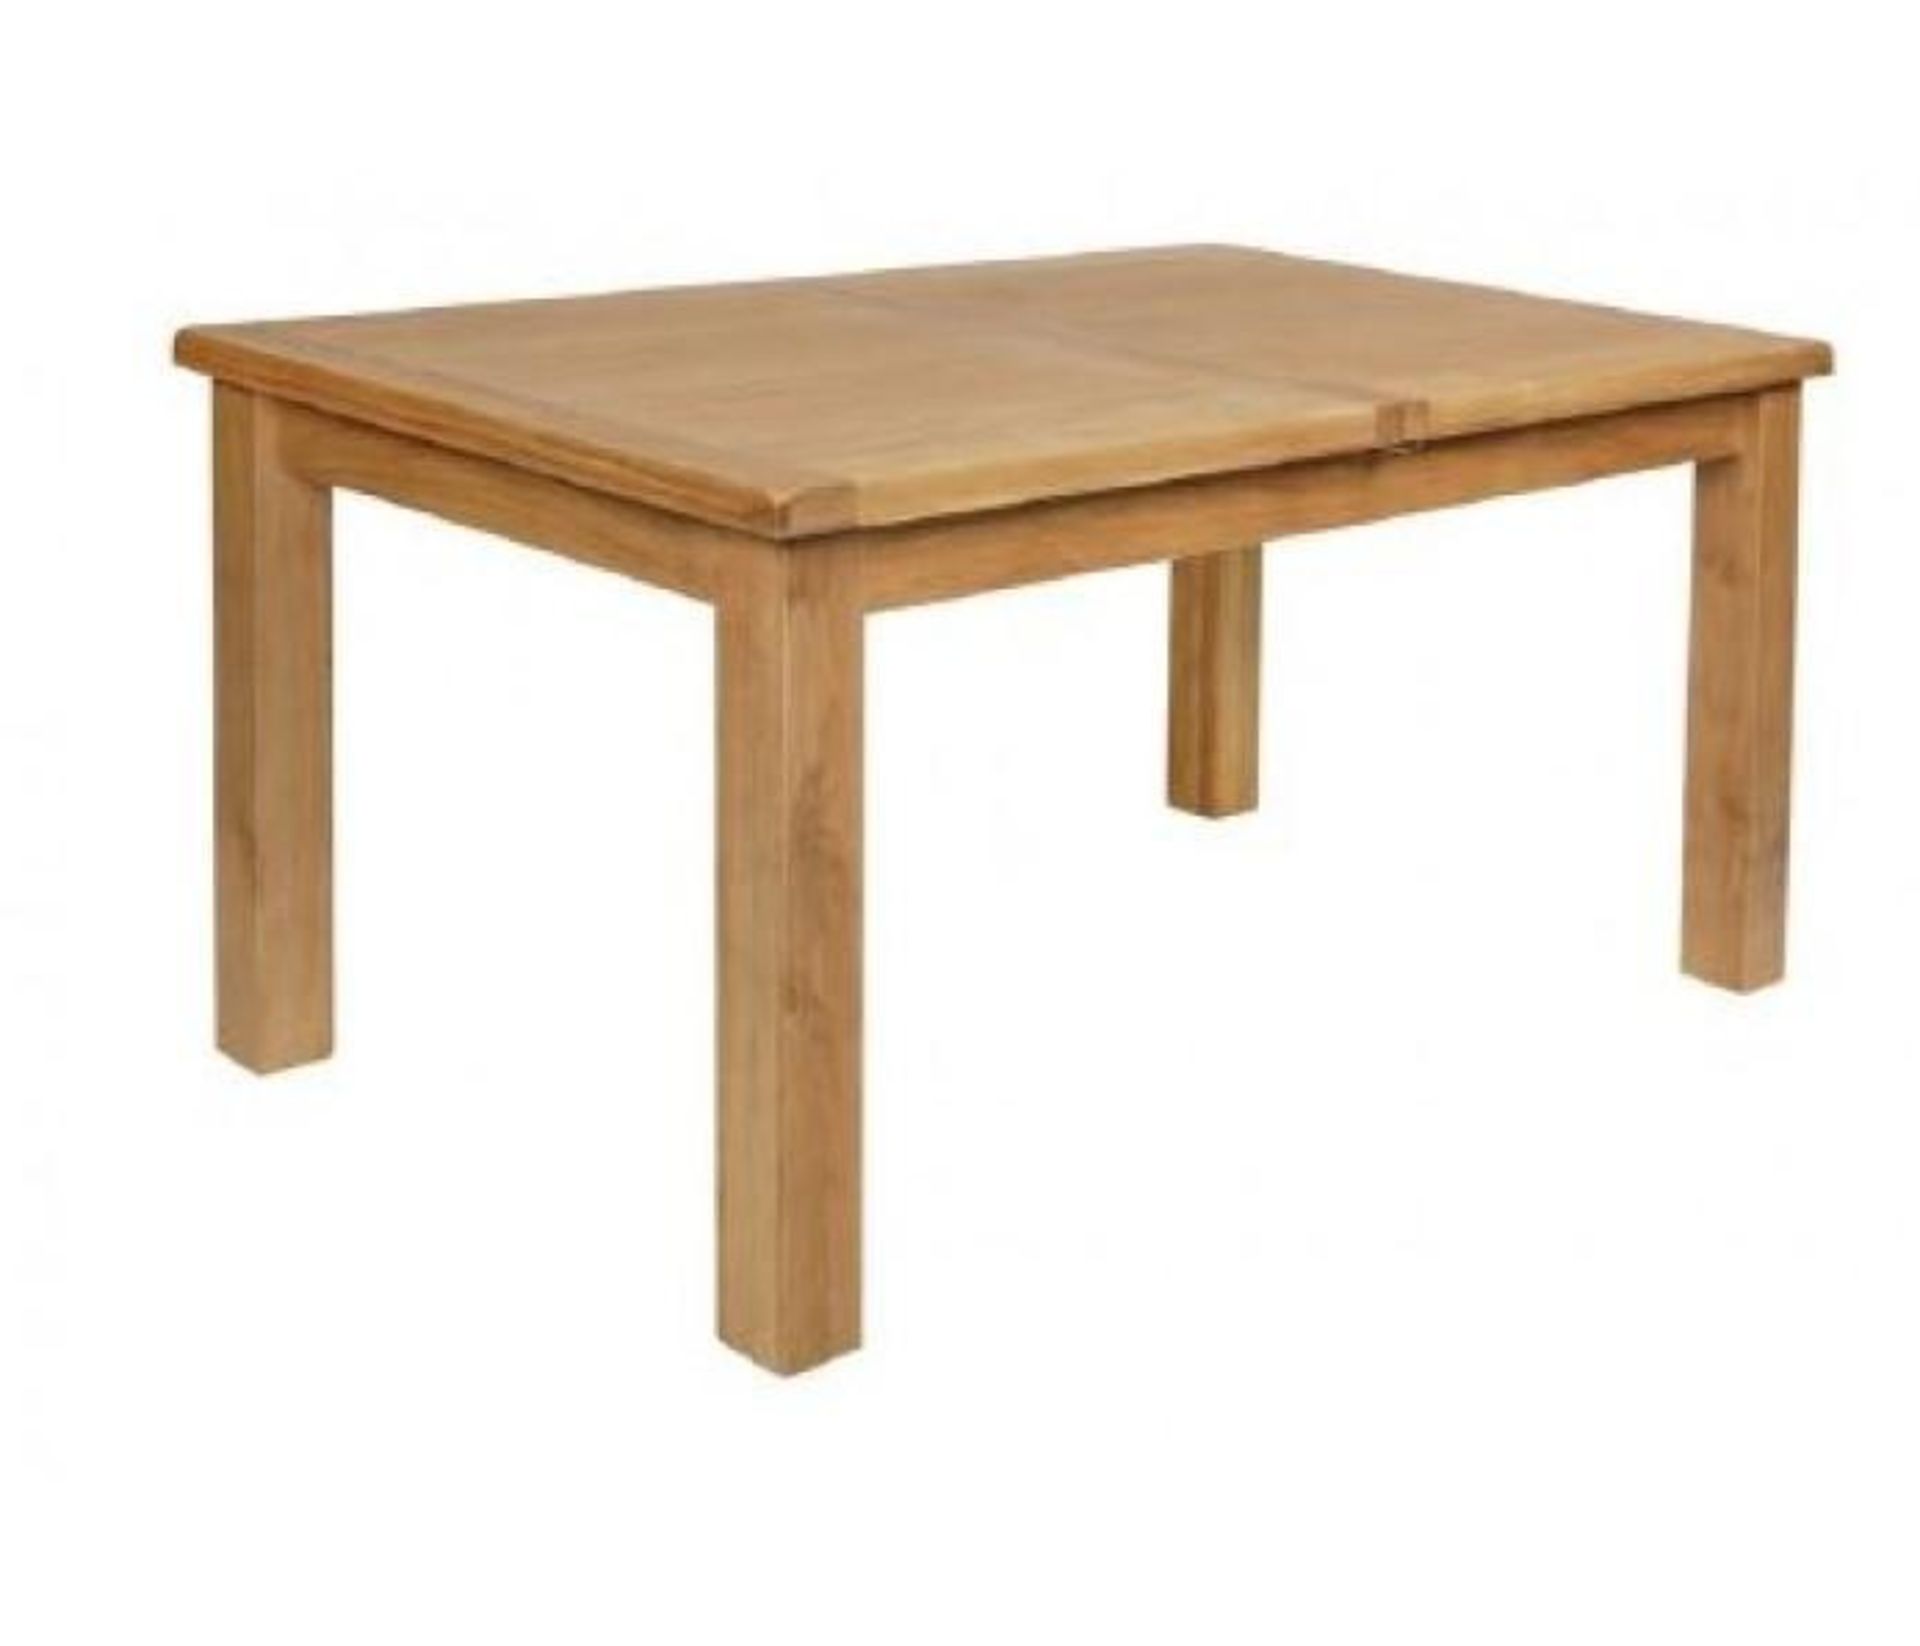 BRAND NEW & BOXED Trewick Dining Table